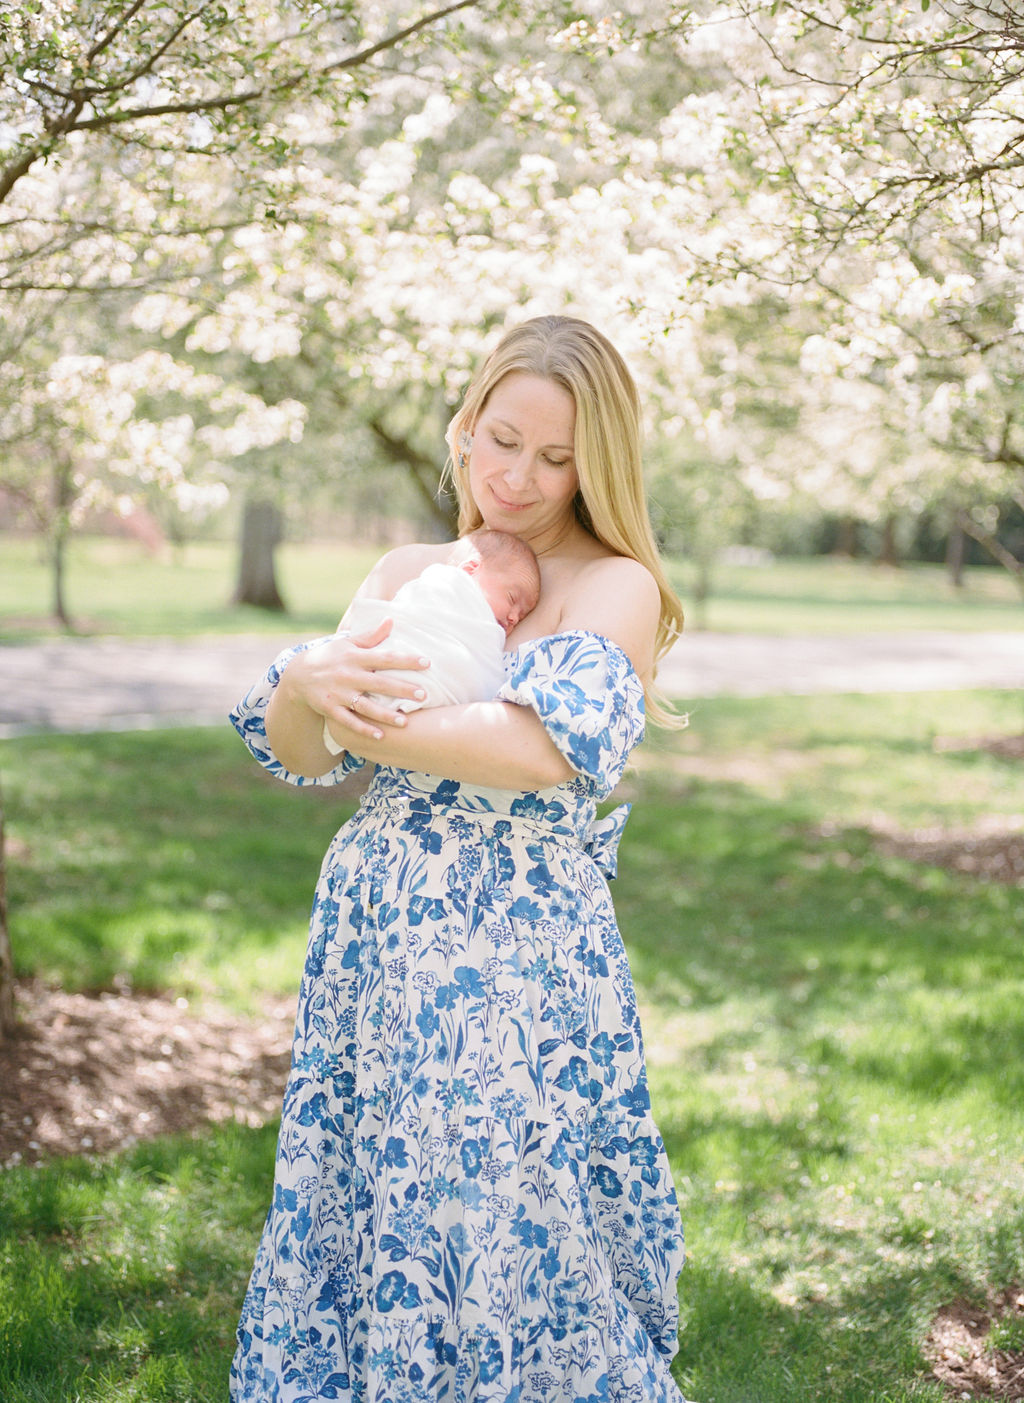 A new mom cradles her sleeping newborn against her chest while standing in a park under white blooming trees hazel jersey city